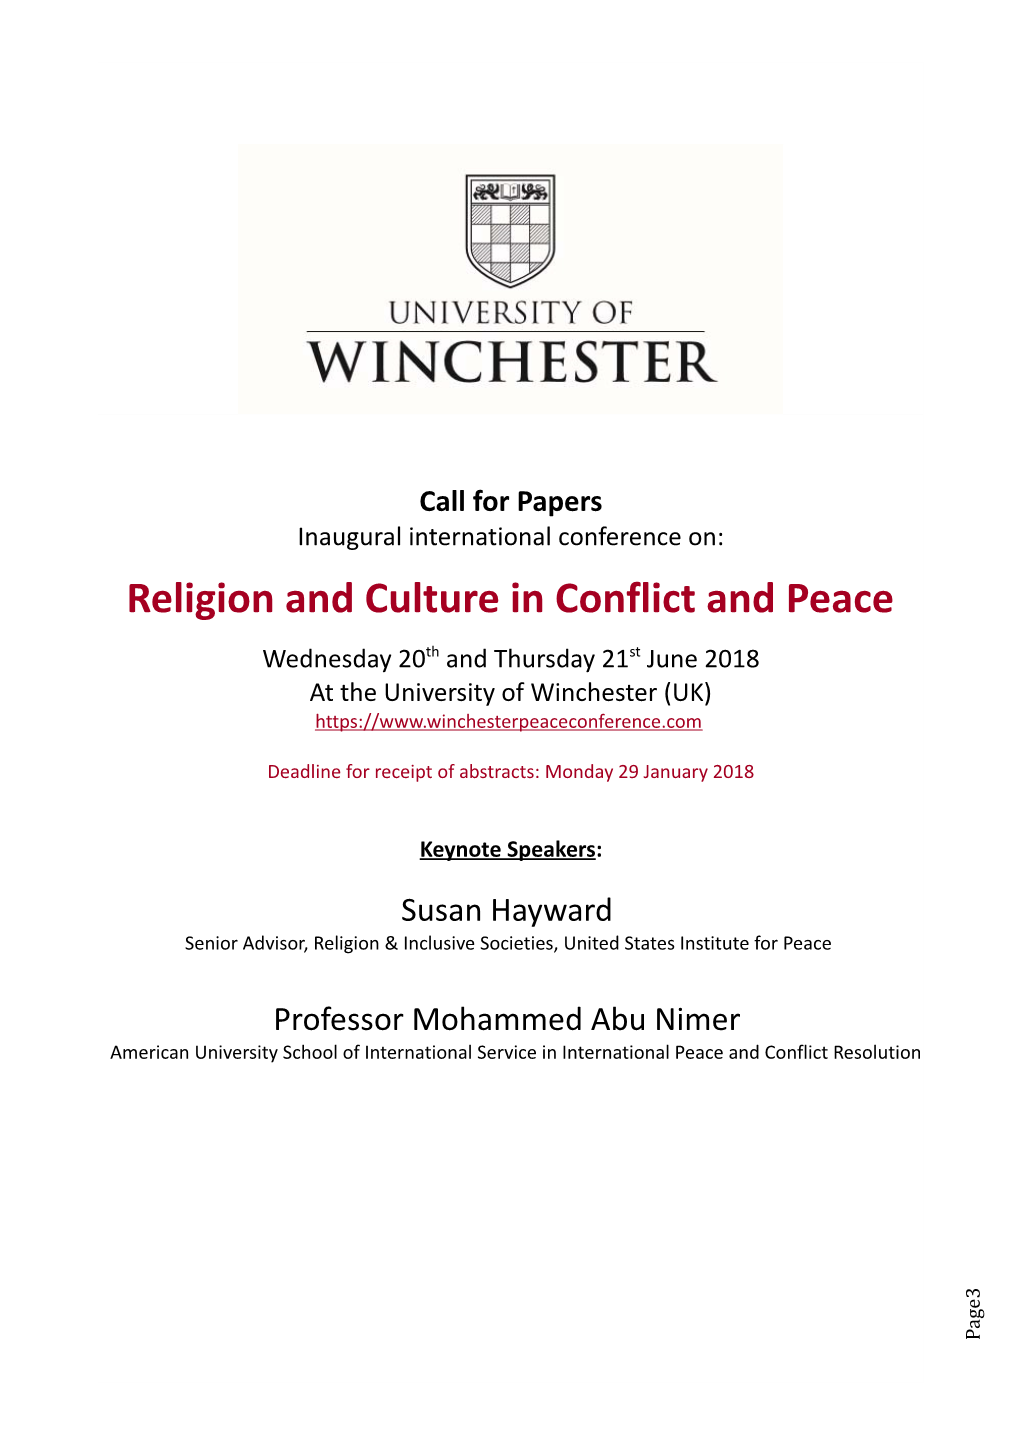 Religion and Culture in Conflict and Peace